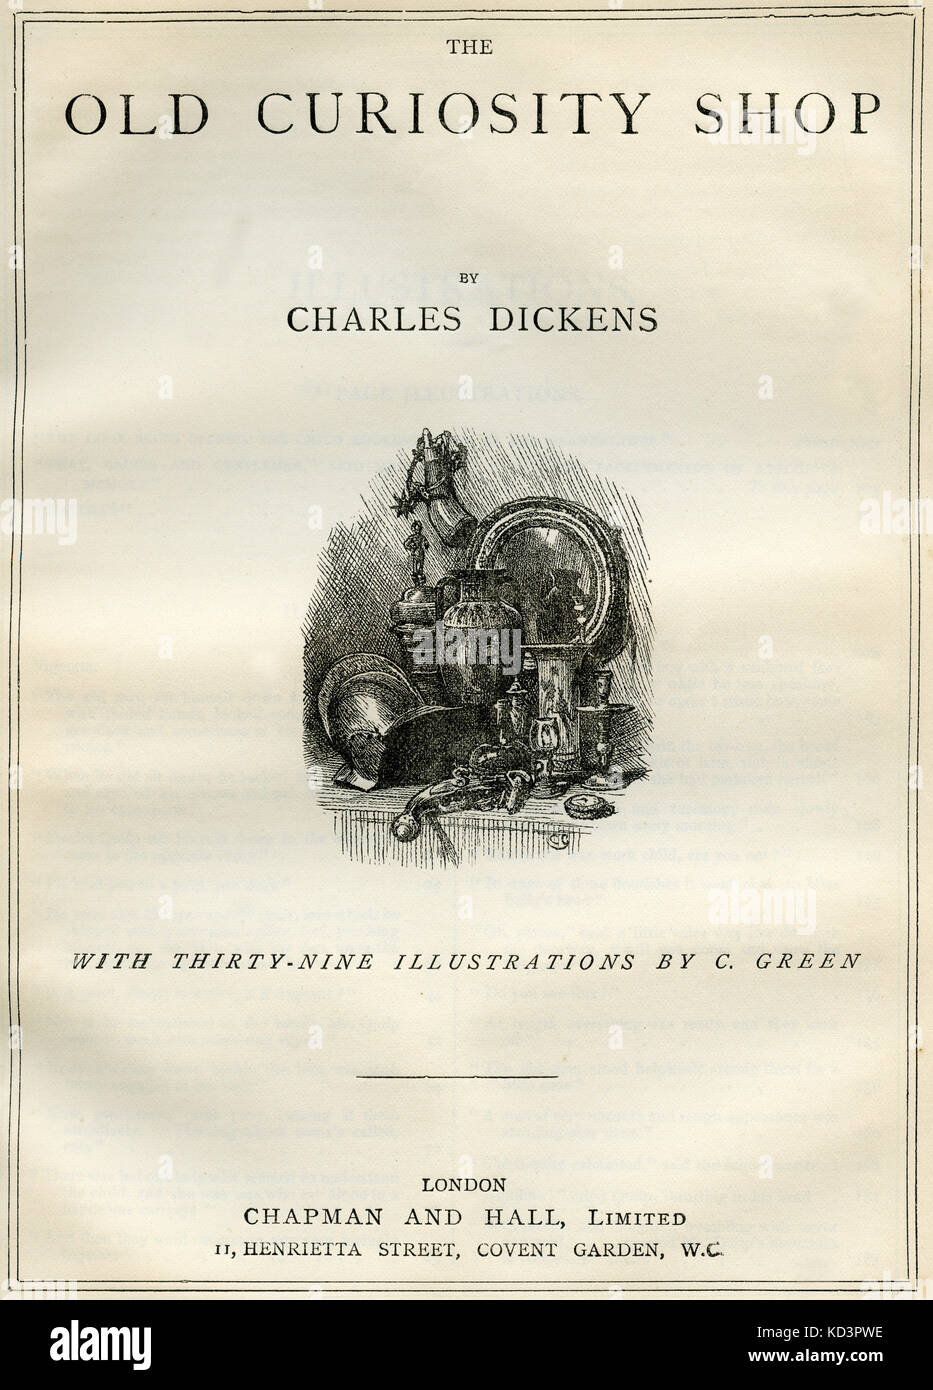 The Old Curiosity Shop  by Charles Dickens Title page -   English novelist, 7 February 1812 - 9 June 1870. Illustration by Charles Green 1840-1898 .  London . Chapman and Hall. Stock Photo